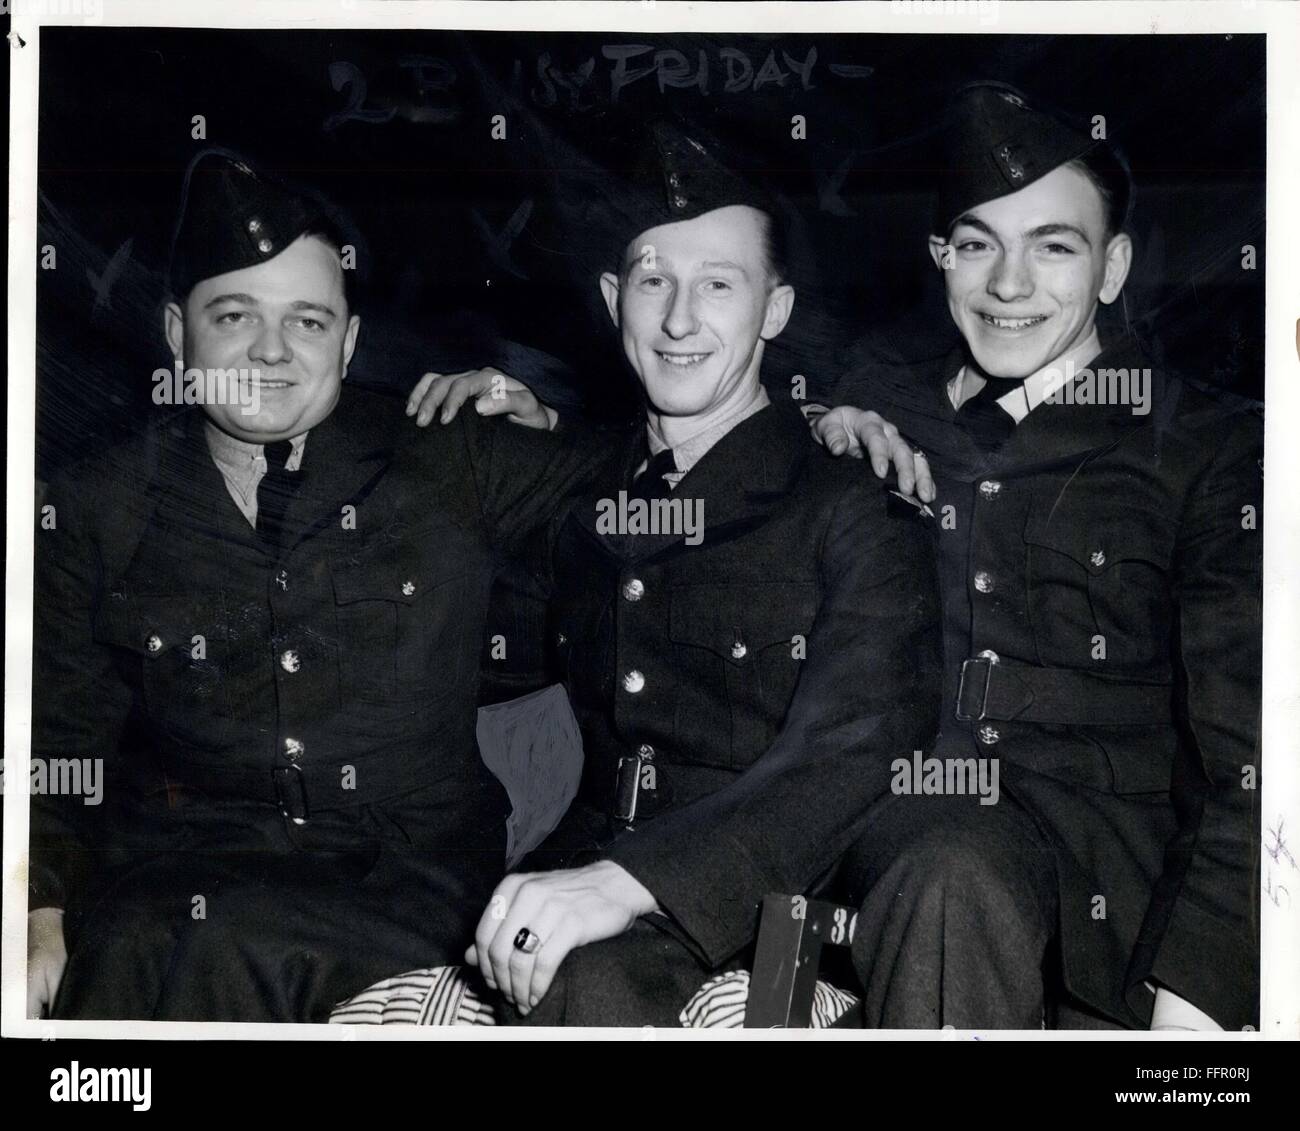 1966 - Three boys from Chicago, III. are now in training in the Royal Canadian Air Force. They are stationed at No. 1 Manning Depot, Toronto. Left to Right: Bart Meeks was a hotel employee before the R.C.A.F. enlisted hims as aircrew, he will soon emerge as pilot, observer or air gunner. Harold VerHelen was pilot for Barton's Air Circus, stunting and chute jumping. He is now training with the Royal Canadian Air Force. J. Basovaky was a radio engineer before he became a Wireless Electrical Mechanic in the Royal Canadian Air Force. © Keystone Pictures USA/ZUMAPRESS.com/Alamy Live News Stock Photo